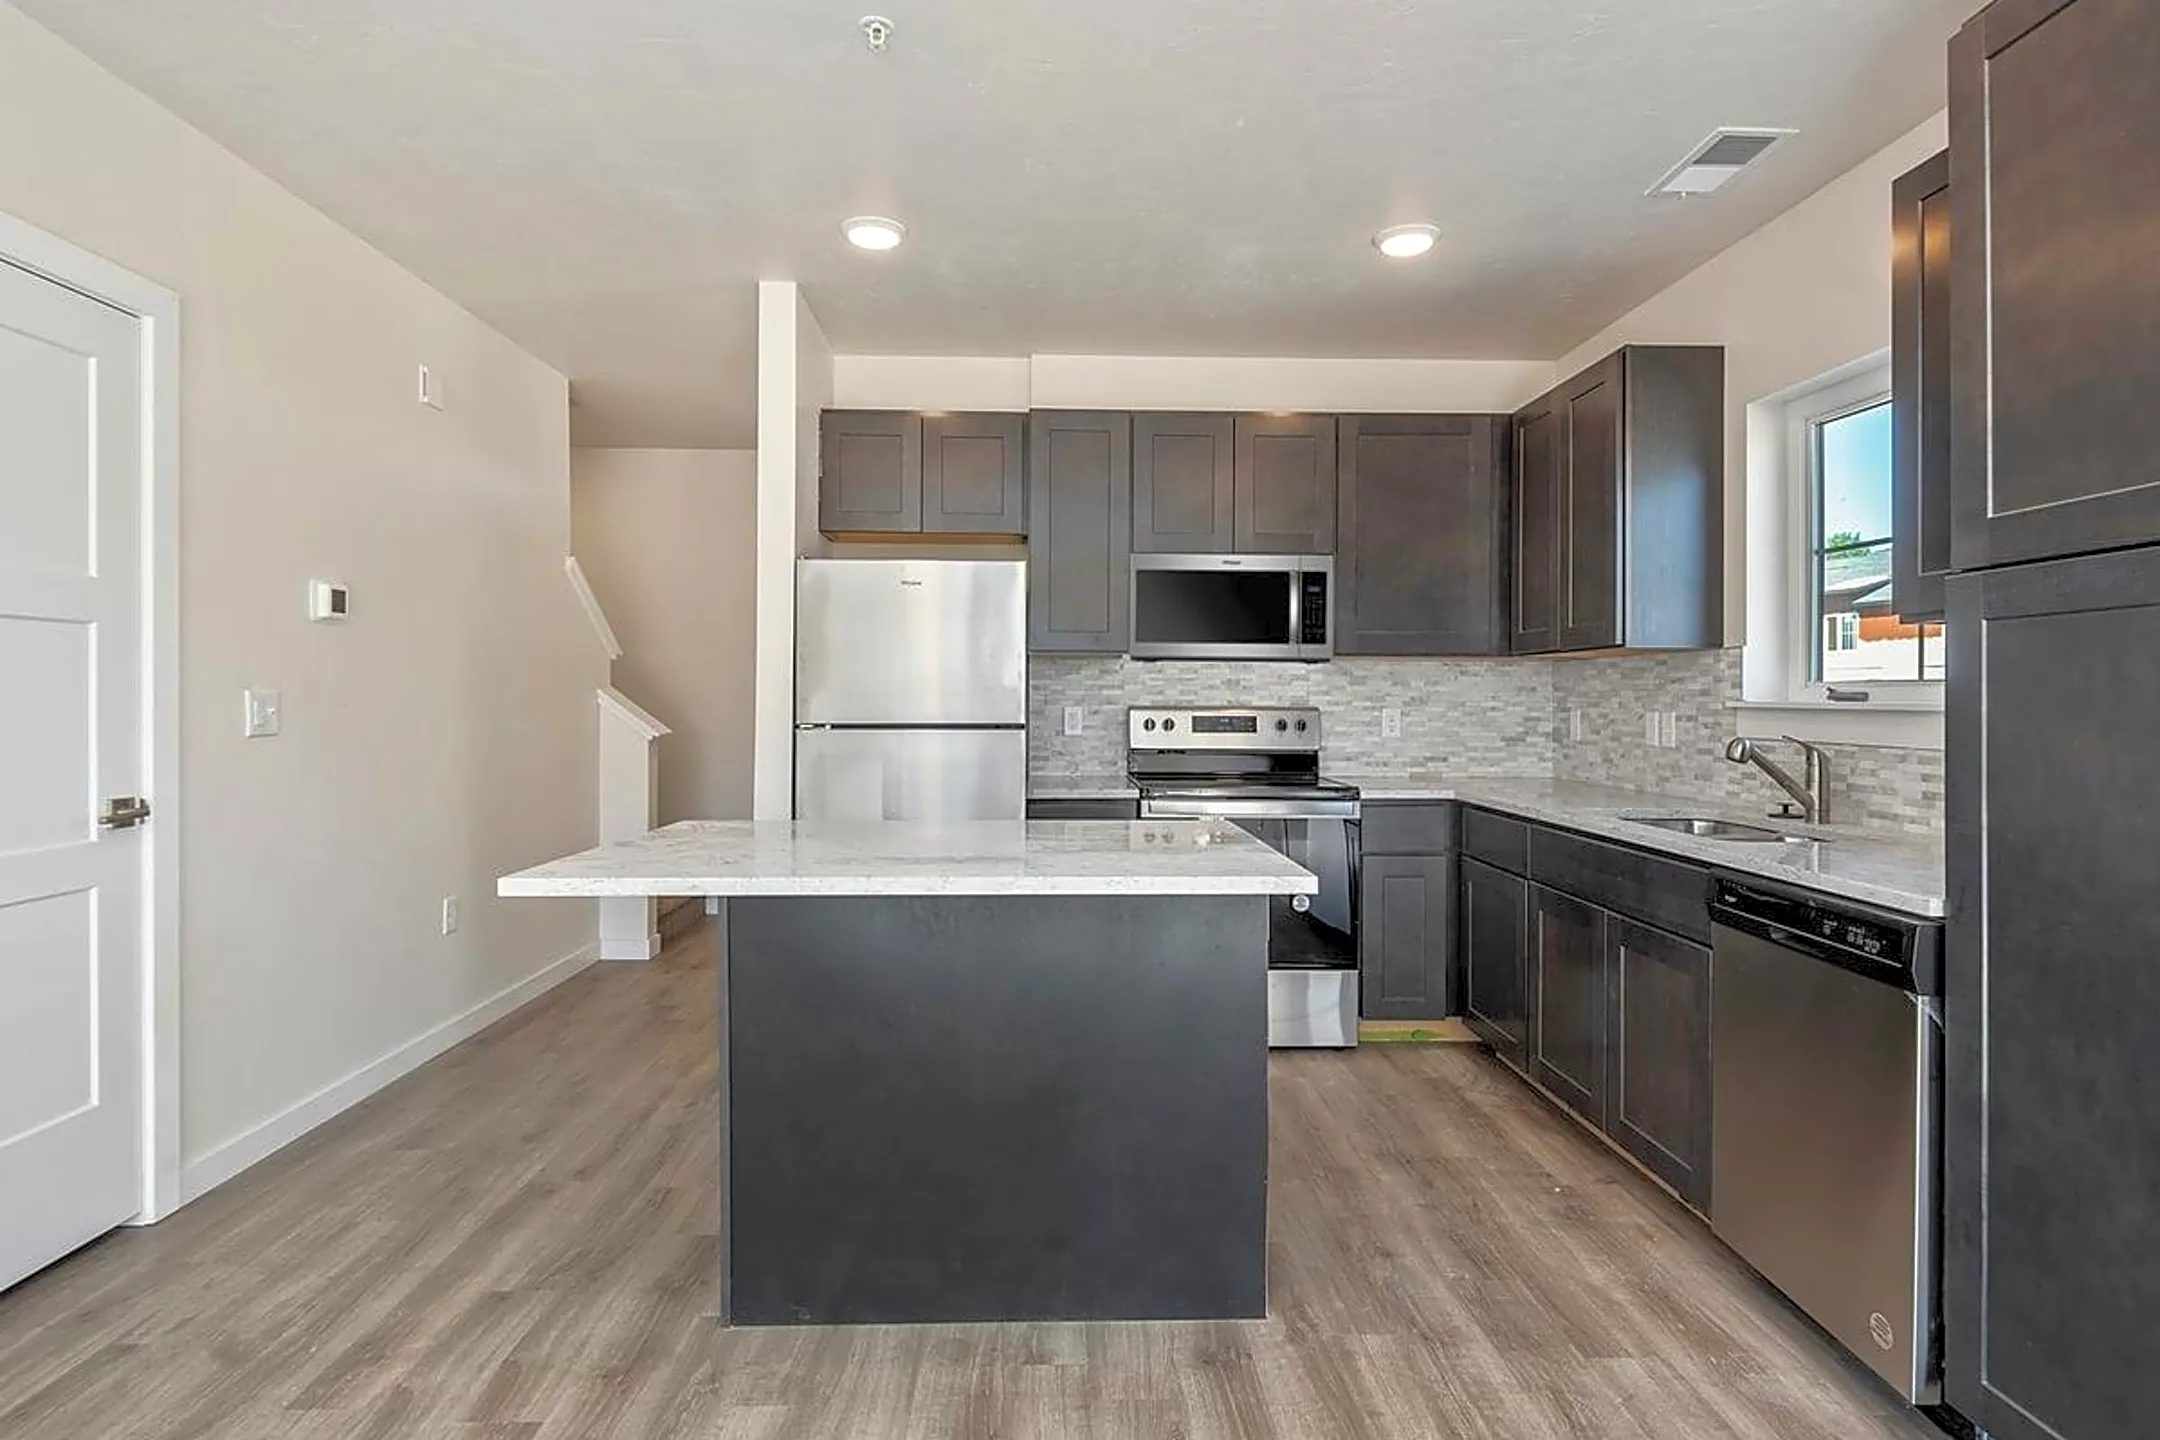 Kitchen - Townhomes At The Silo - Boise, ID